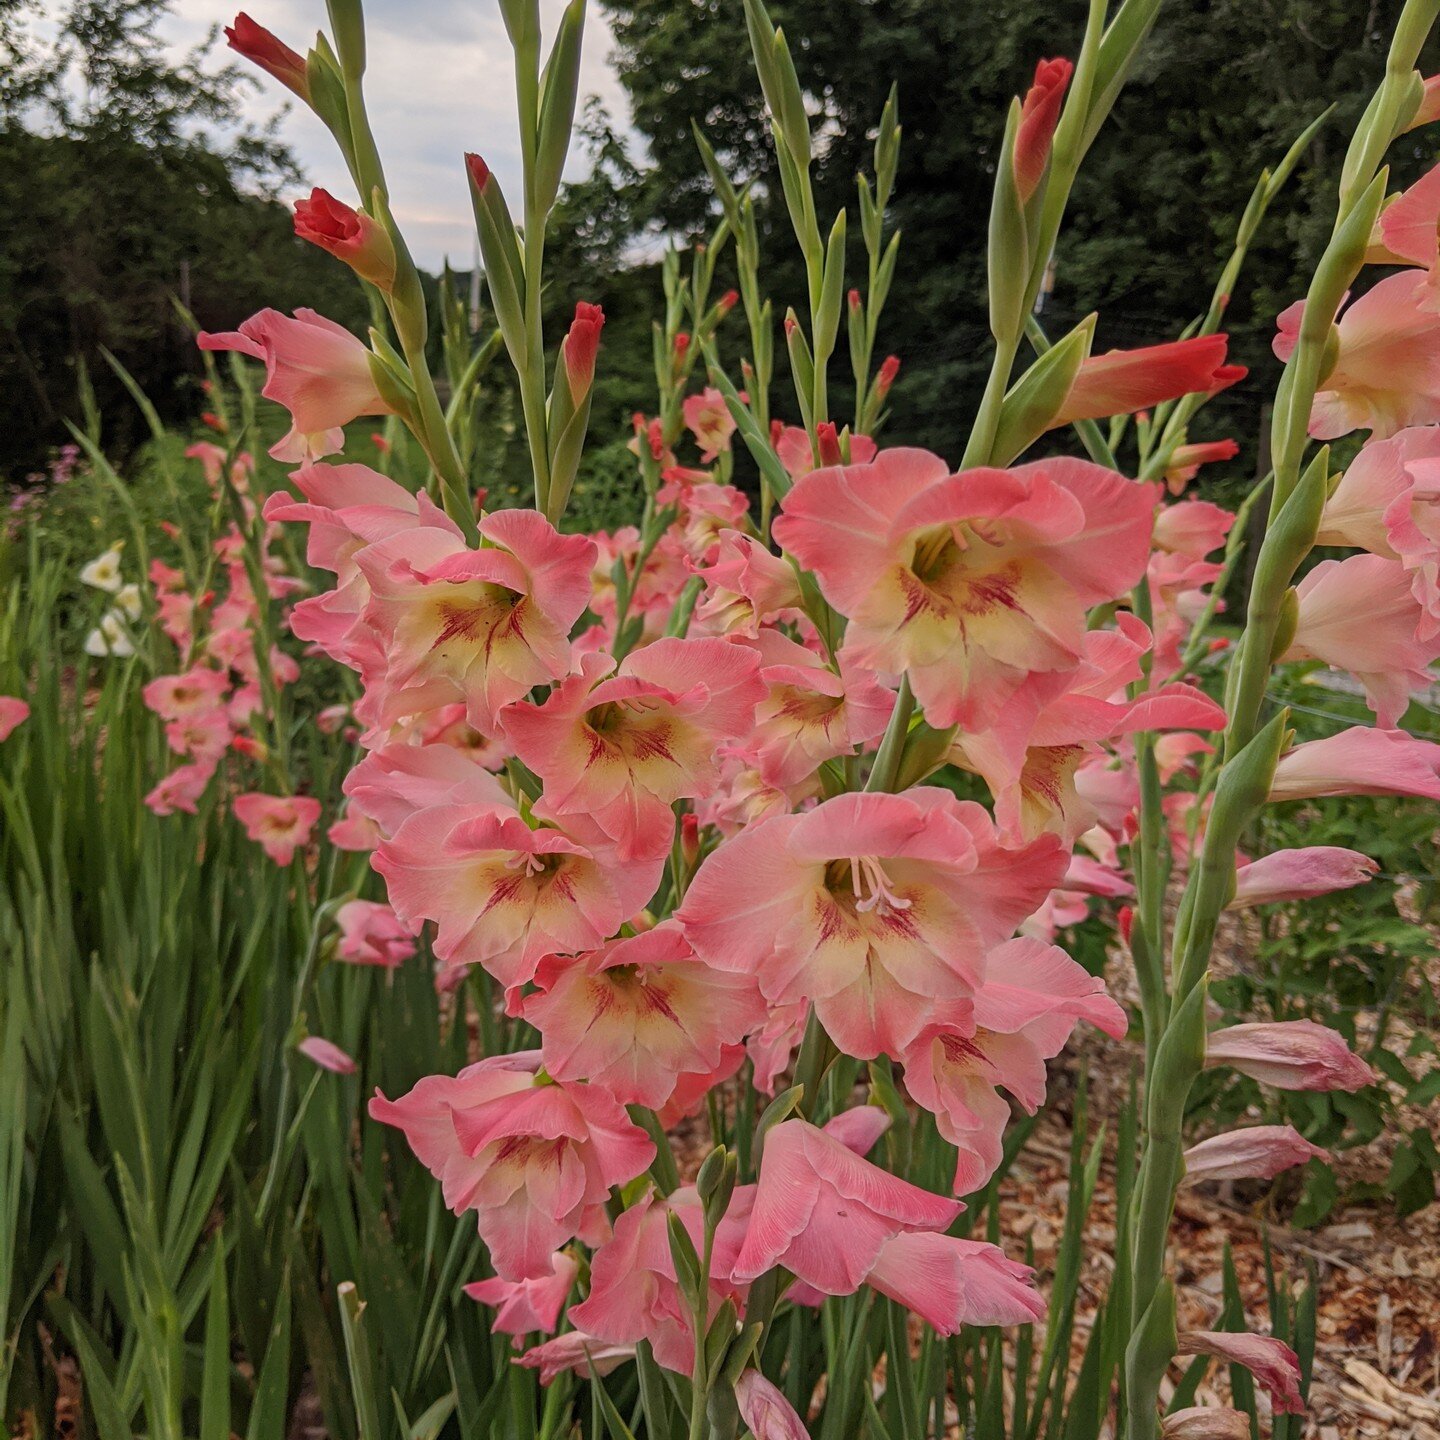 Running late this year but... FINALLY got my hardy gladiolus up for sale again! These have been fully hardy for me for many years now in gardens in Zone 5, 6, and 7. I've also selected for strong stems that usually don't need staking. They're great c